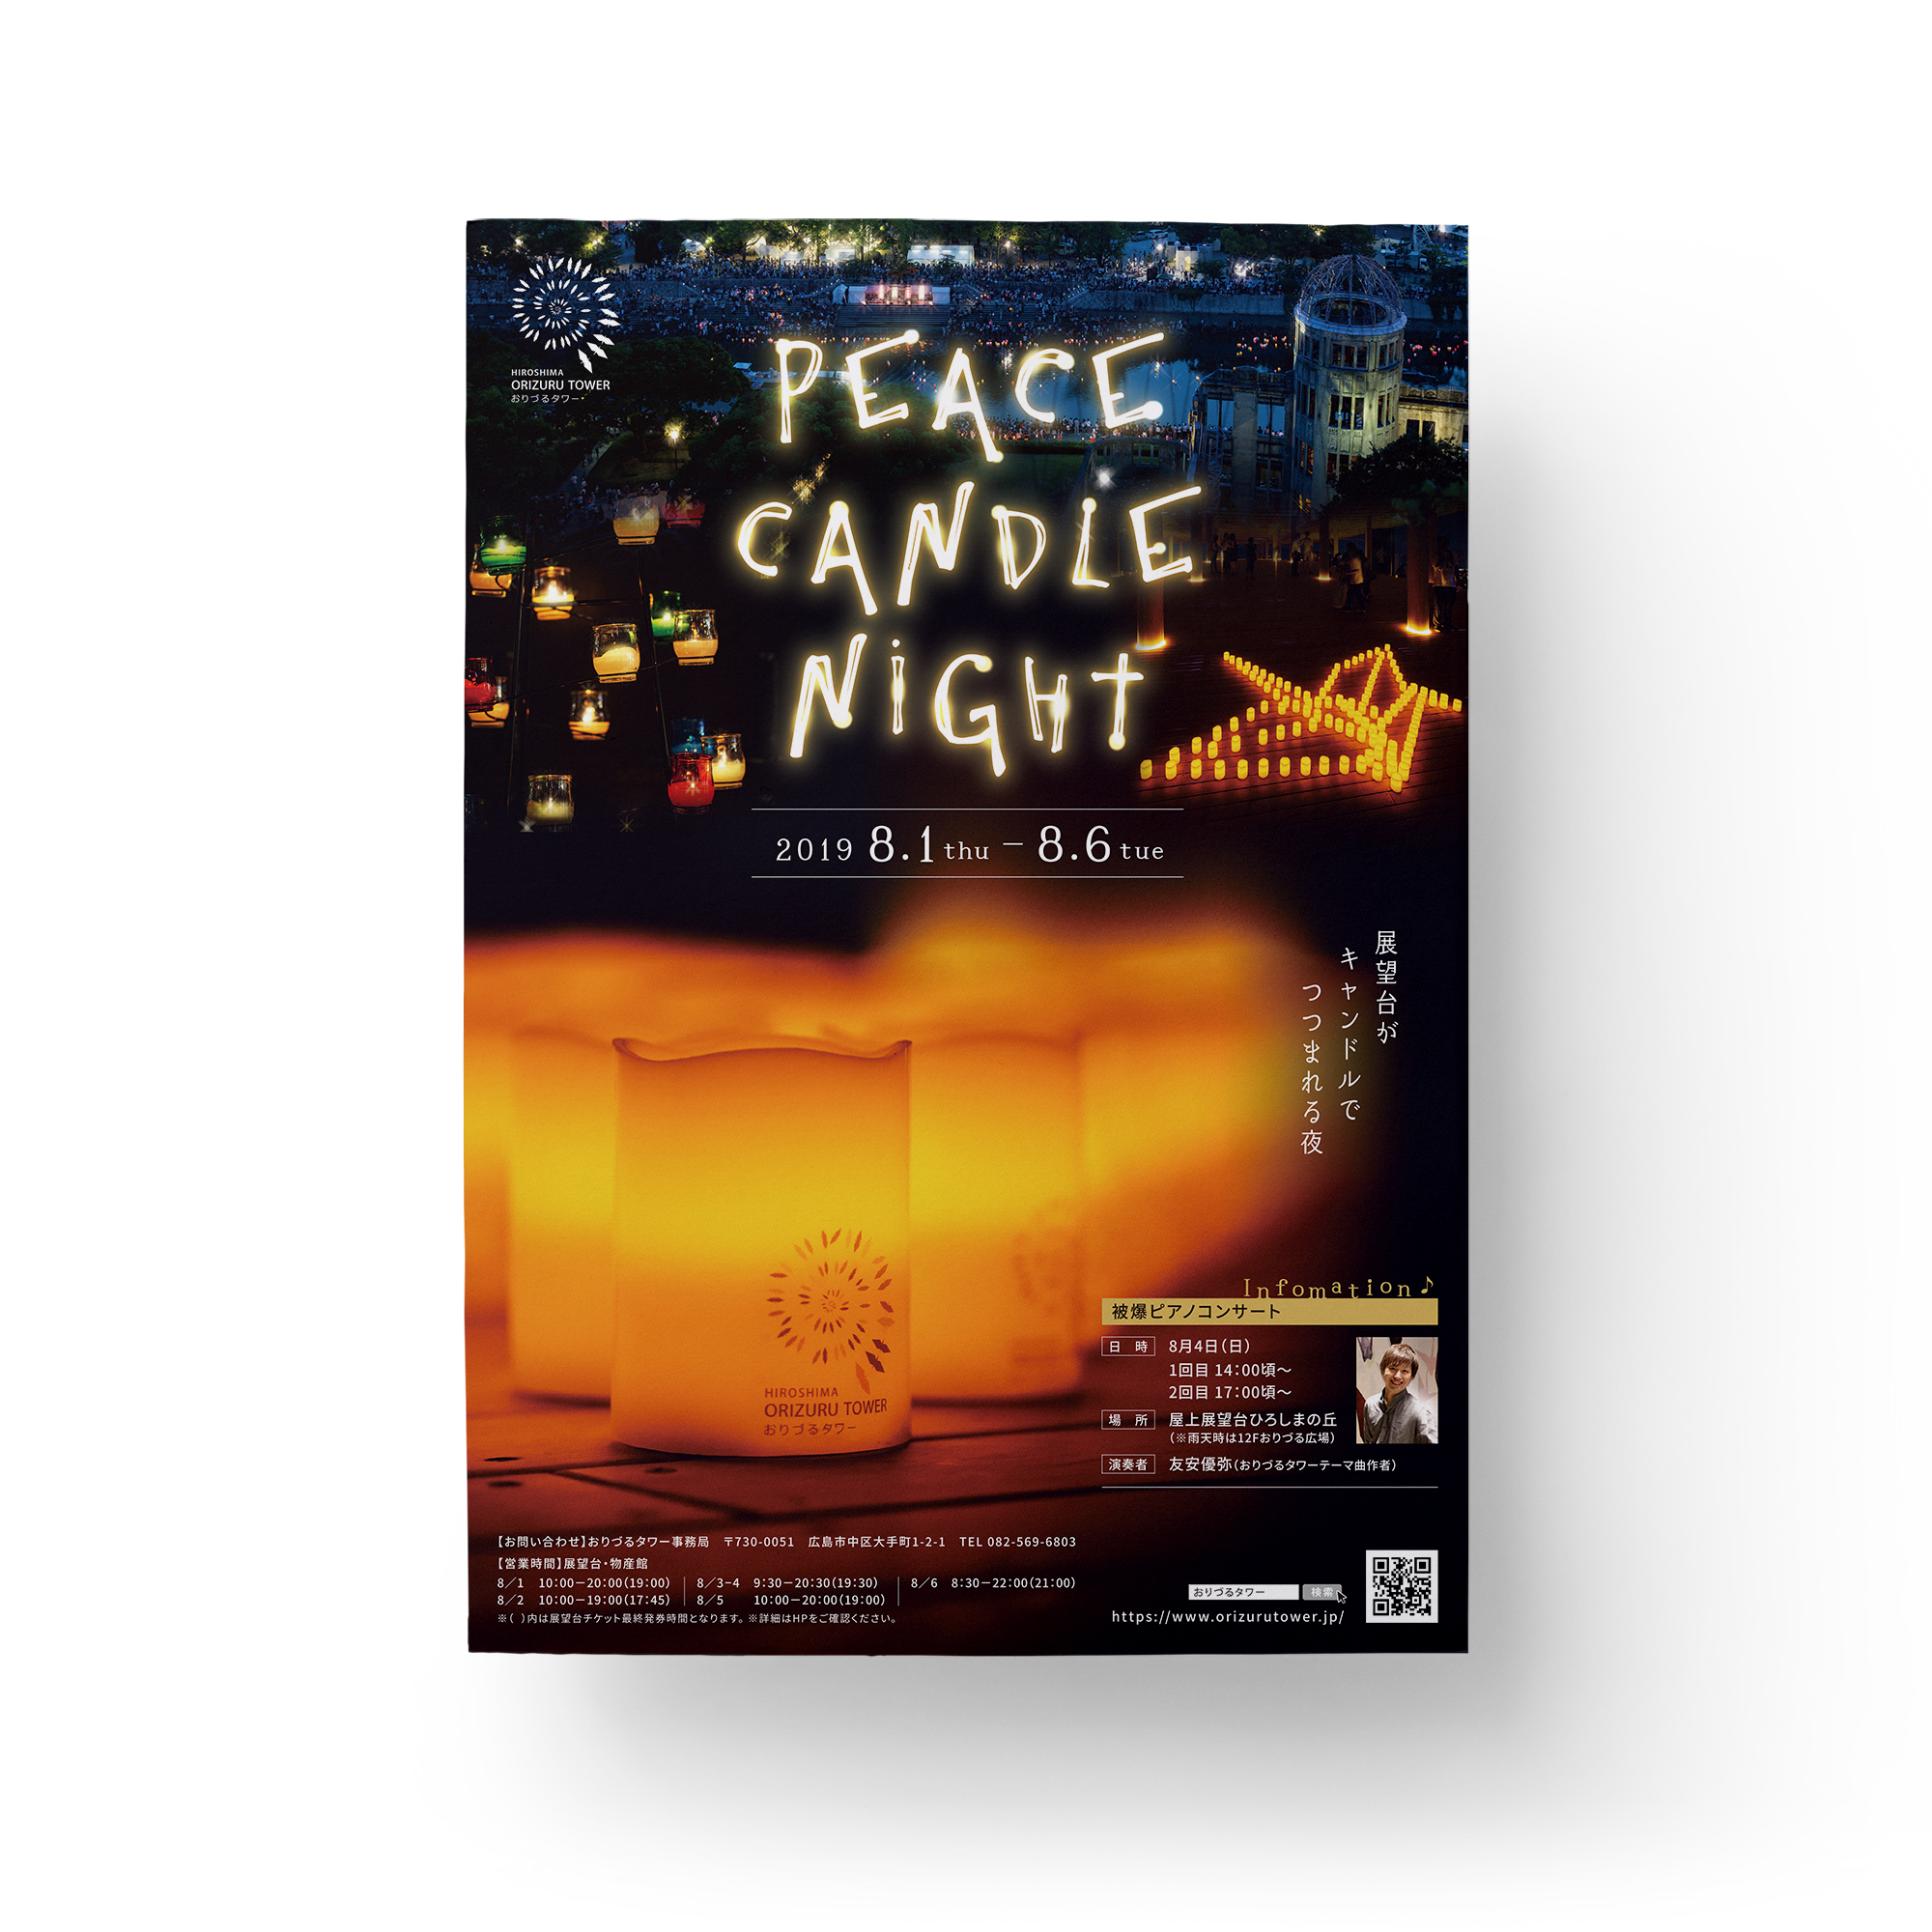 PEACE CANDLE NIGHT